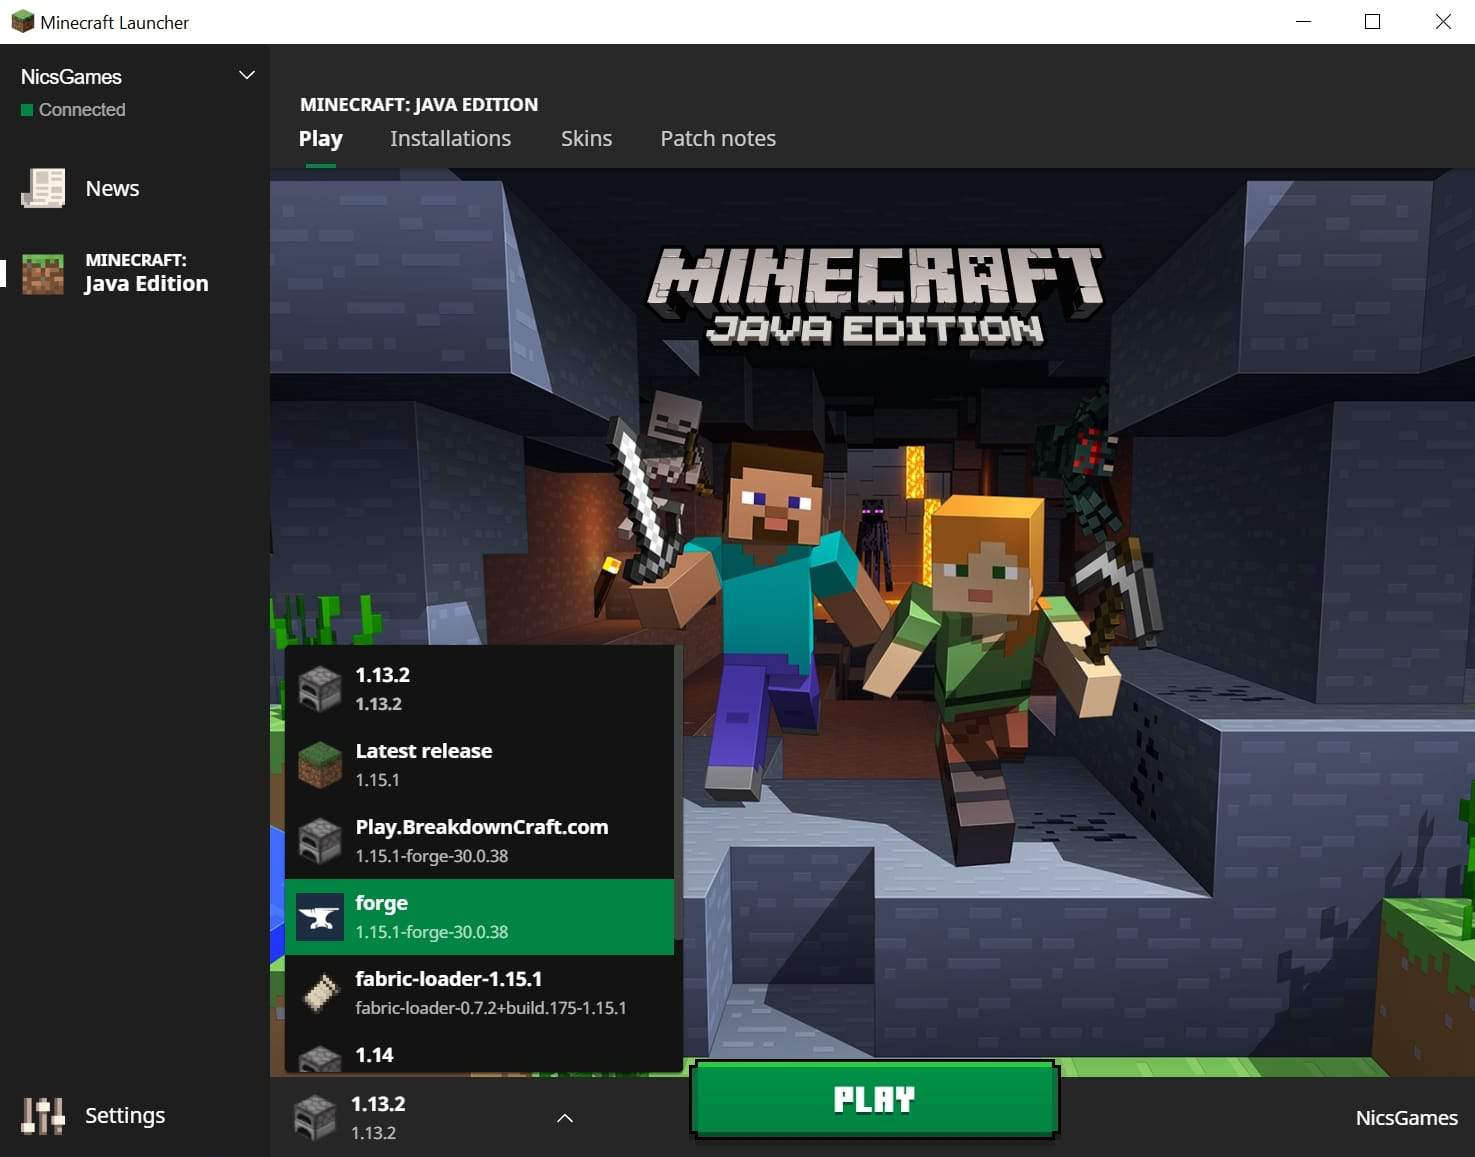 How to Download OptiFine 1.16 and prepare Minecraft for it?